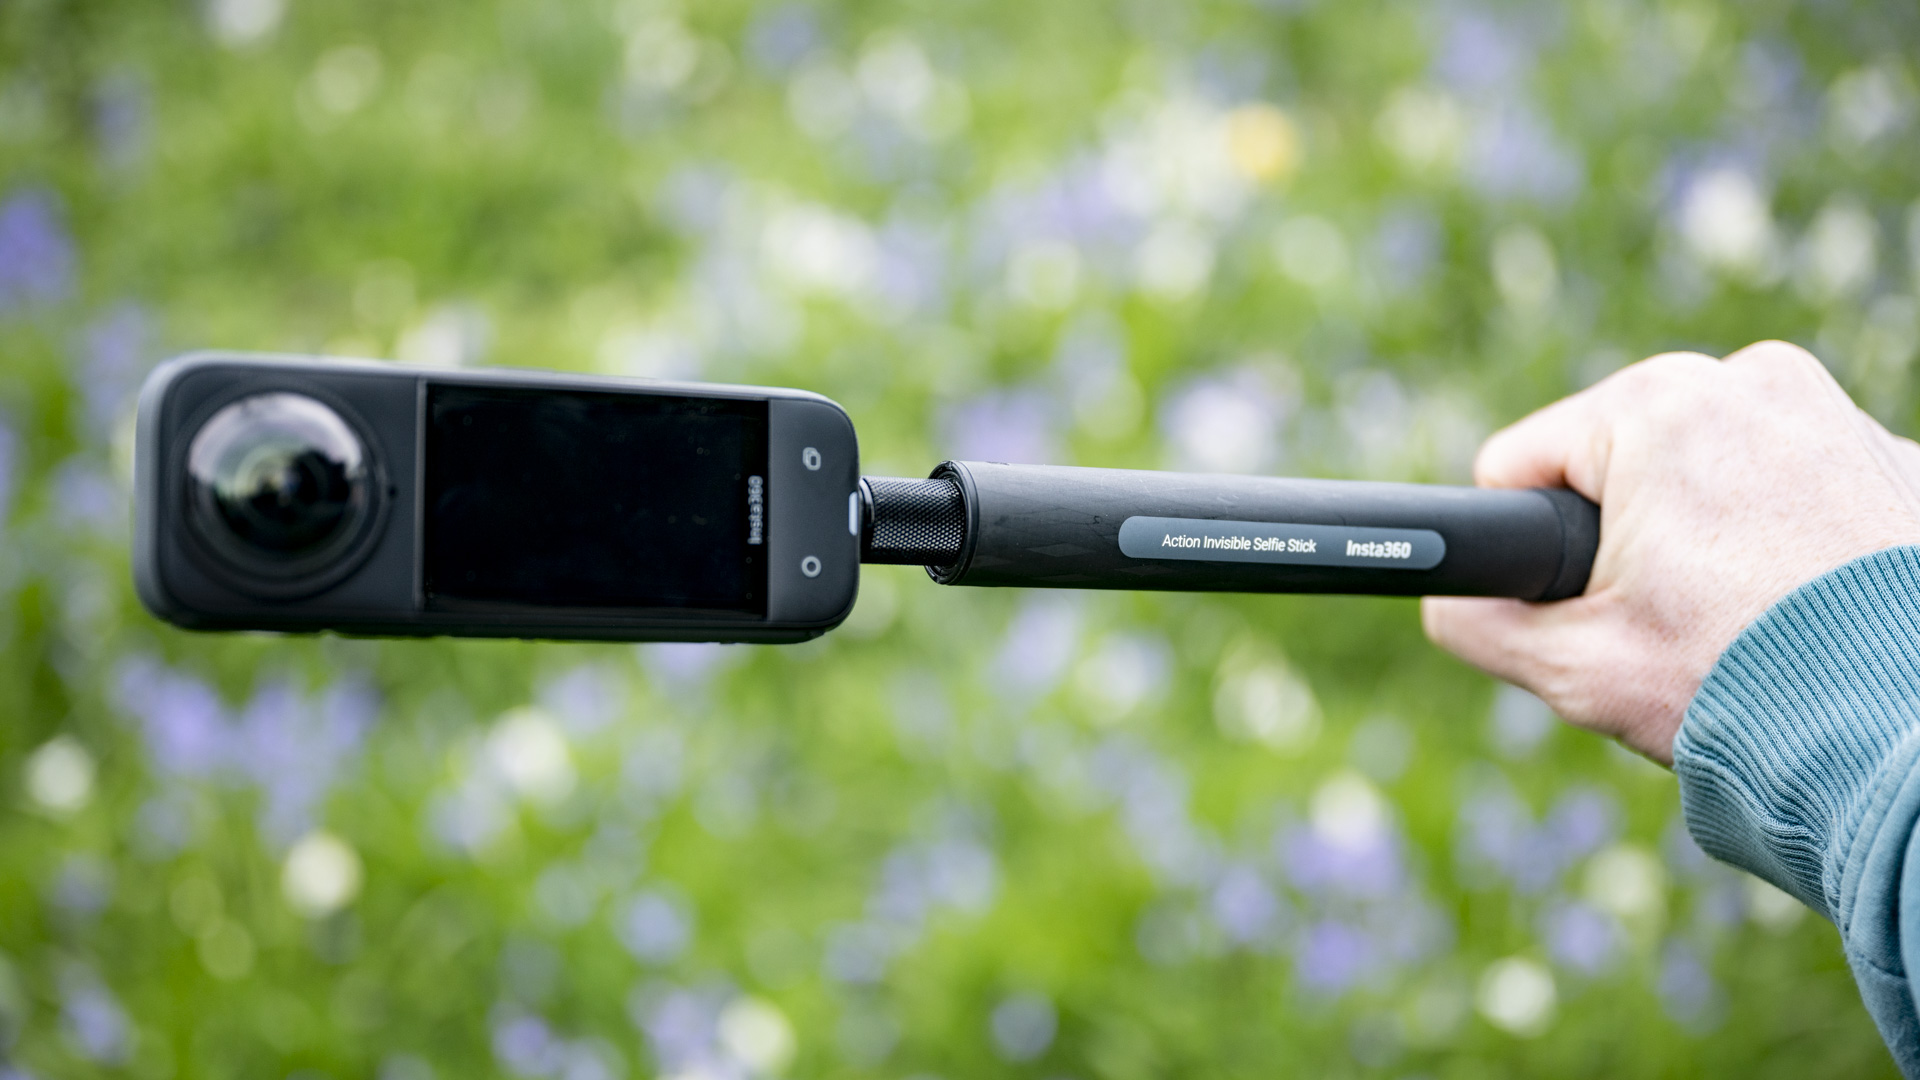 Insta360 X4 360 degree camera mounted to a selfie stick